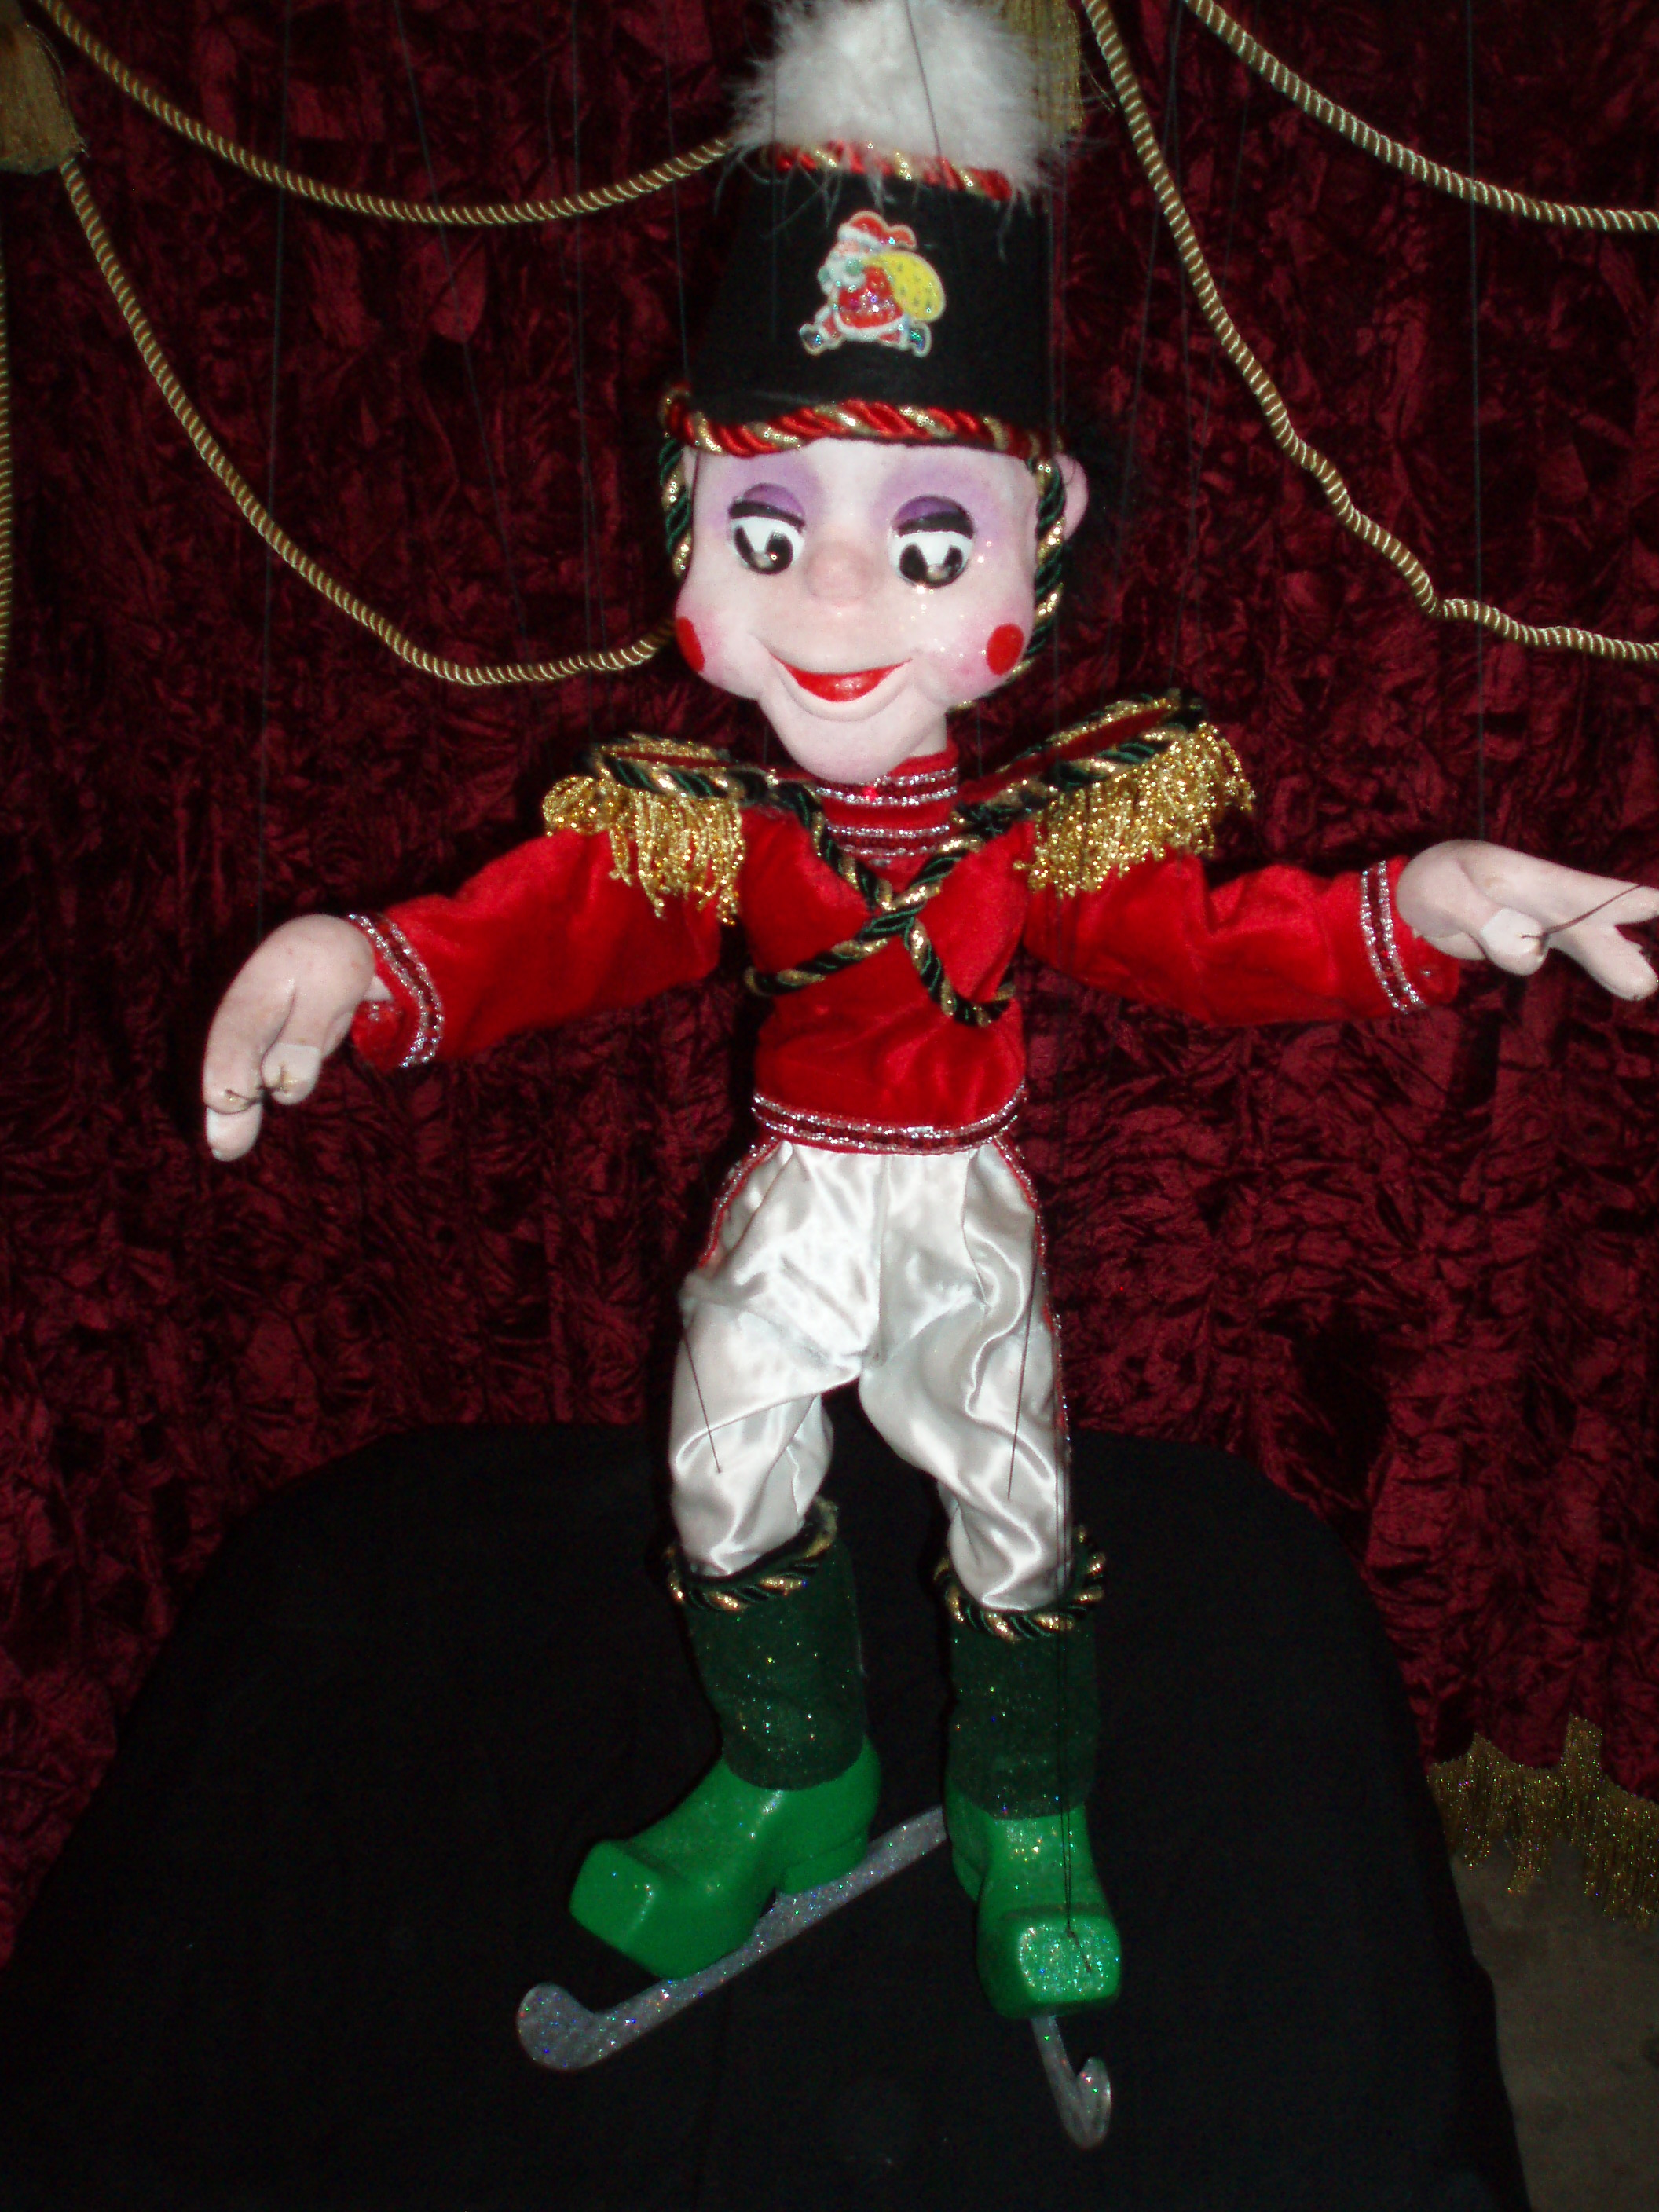 Soldier marionette puppet dressed in a red jacket, white slacks and green ice skates.